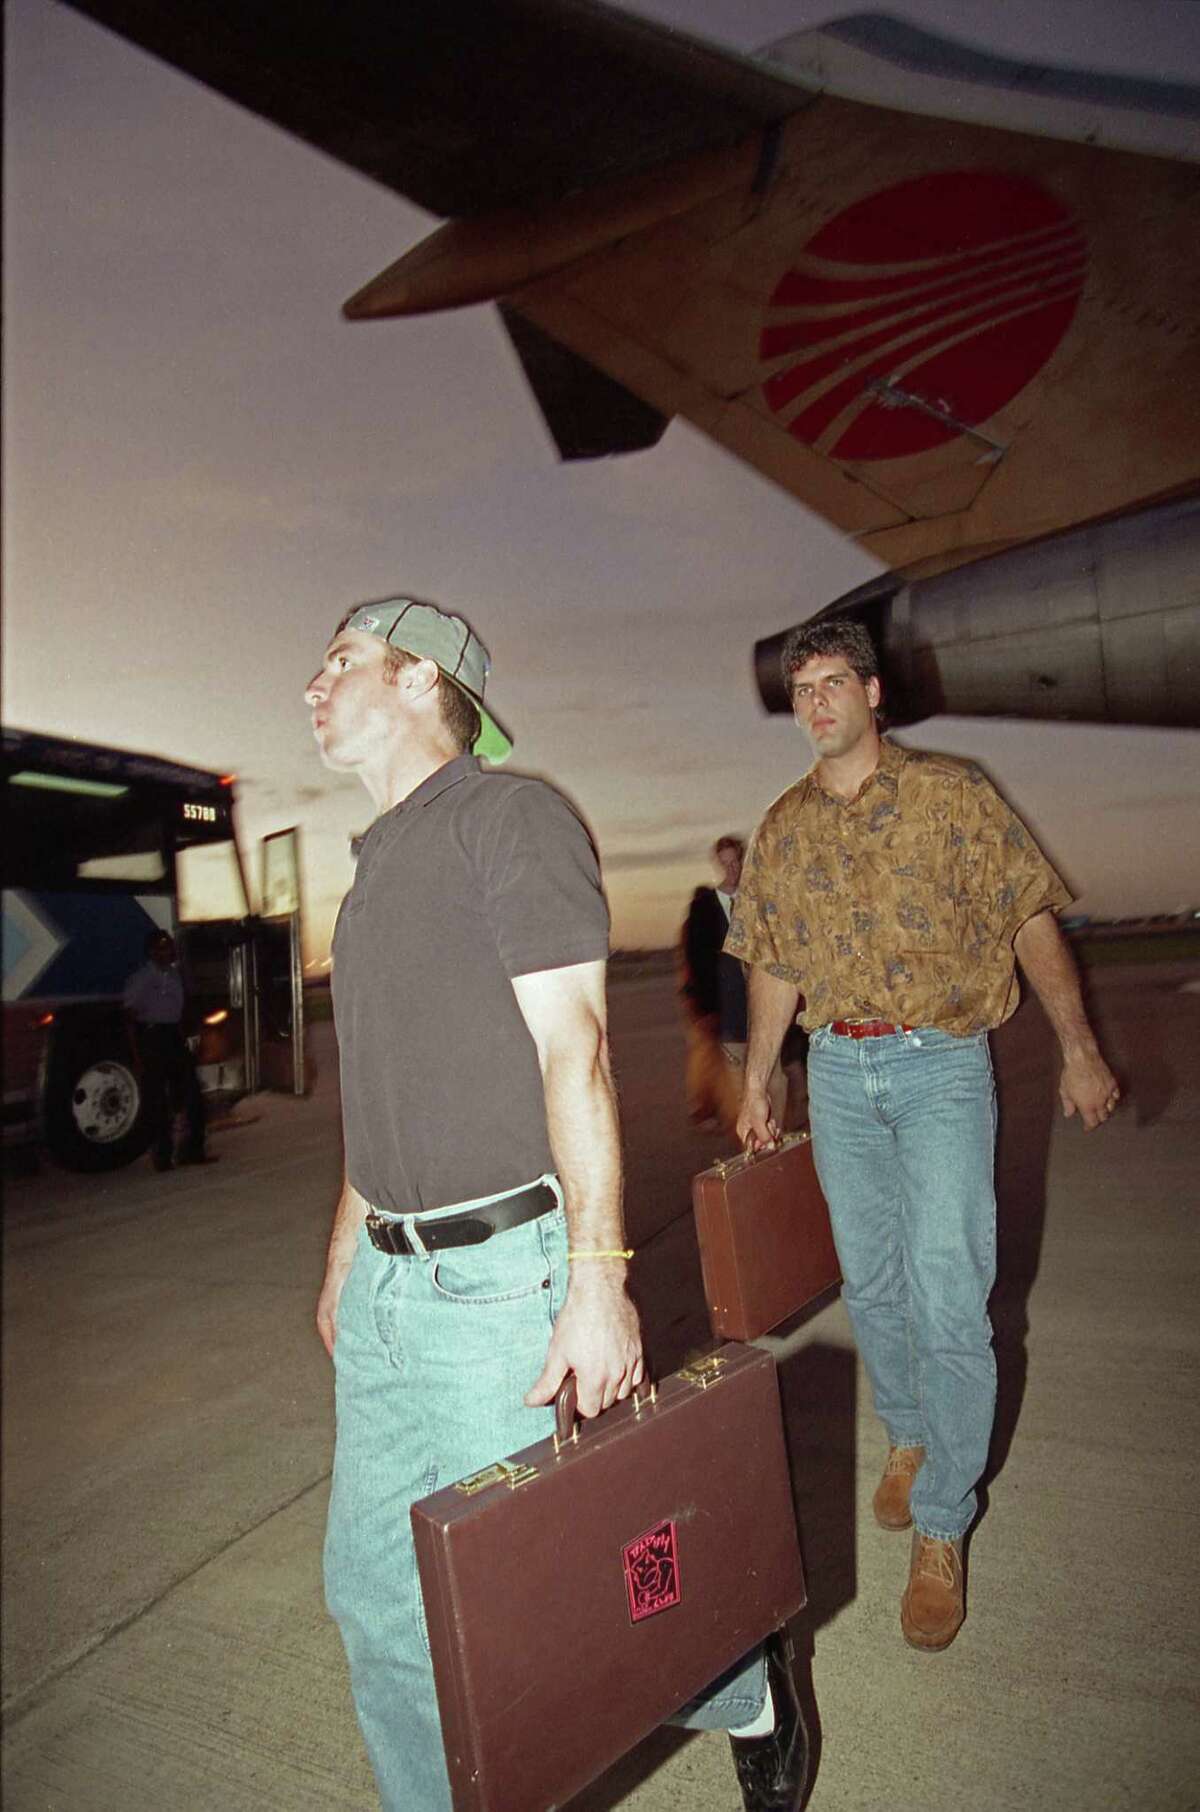 08/23/1992 - (L-R) Houston Astros Casey Candaele and Ken Caminiti disembark from the Astros' team plane at Hobby Airport on Sunday night. The Astros completed their longest road trip in franchise history, 26 games in 28 days, made necessary because the Republican National Convention took over the Astrodome for the month.